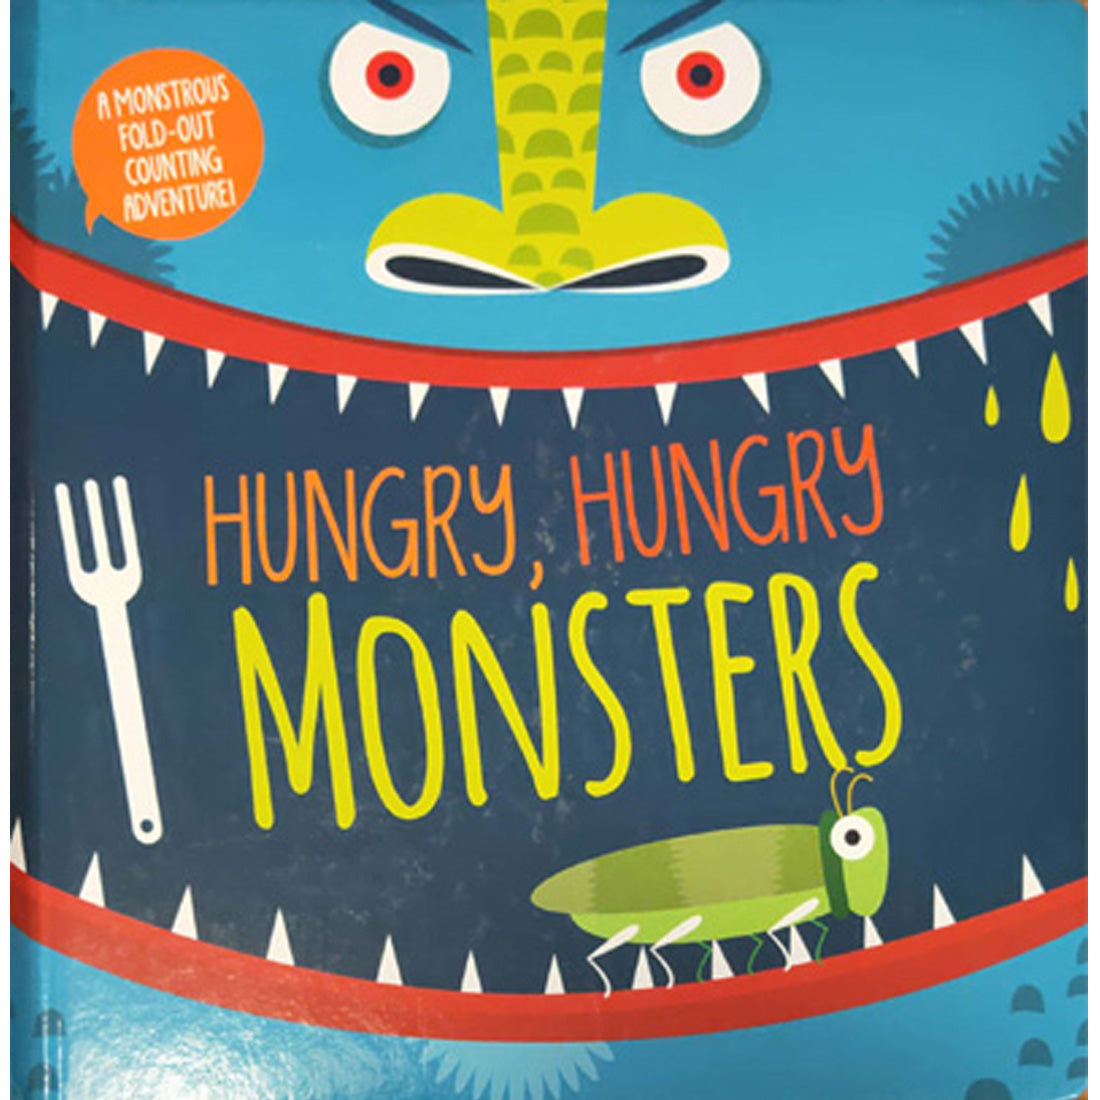 Hungry Hungry Monsters